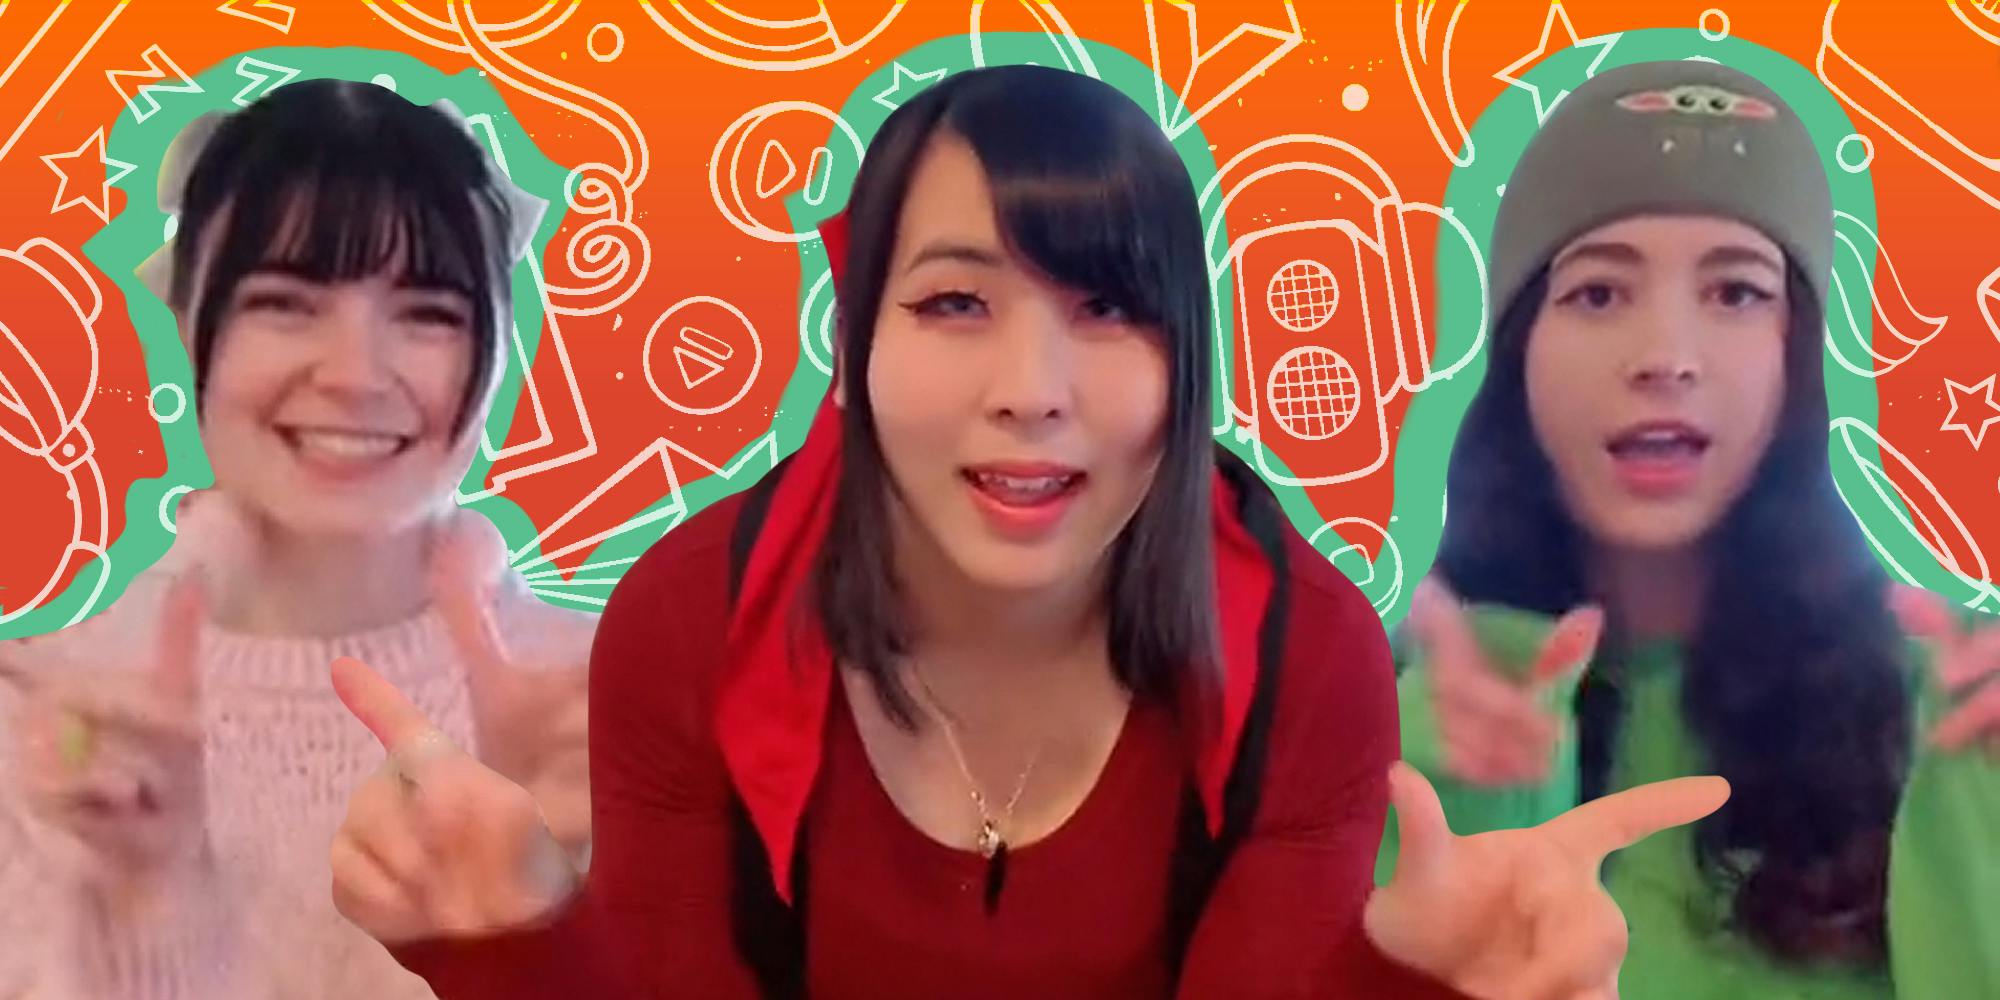 Jpop group Sorb3t in front of orange to red vertical gradient background with musical icons Passionfruit Remix